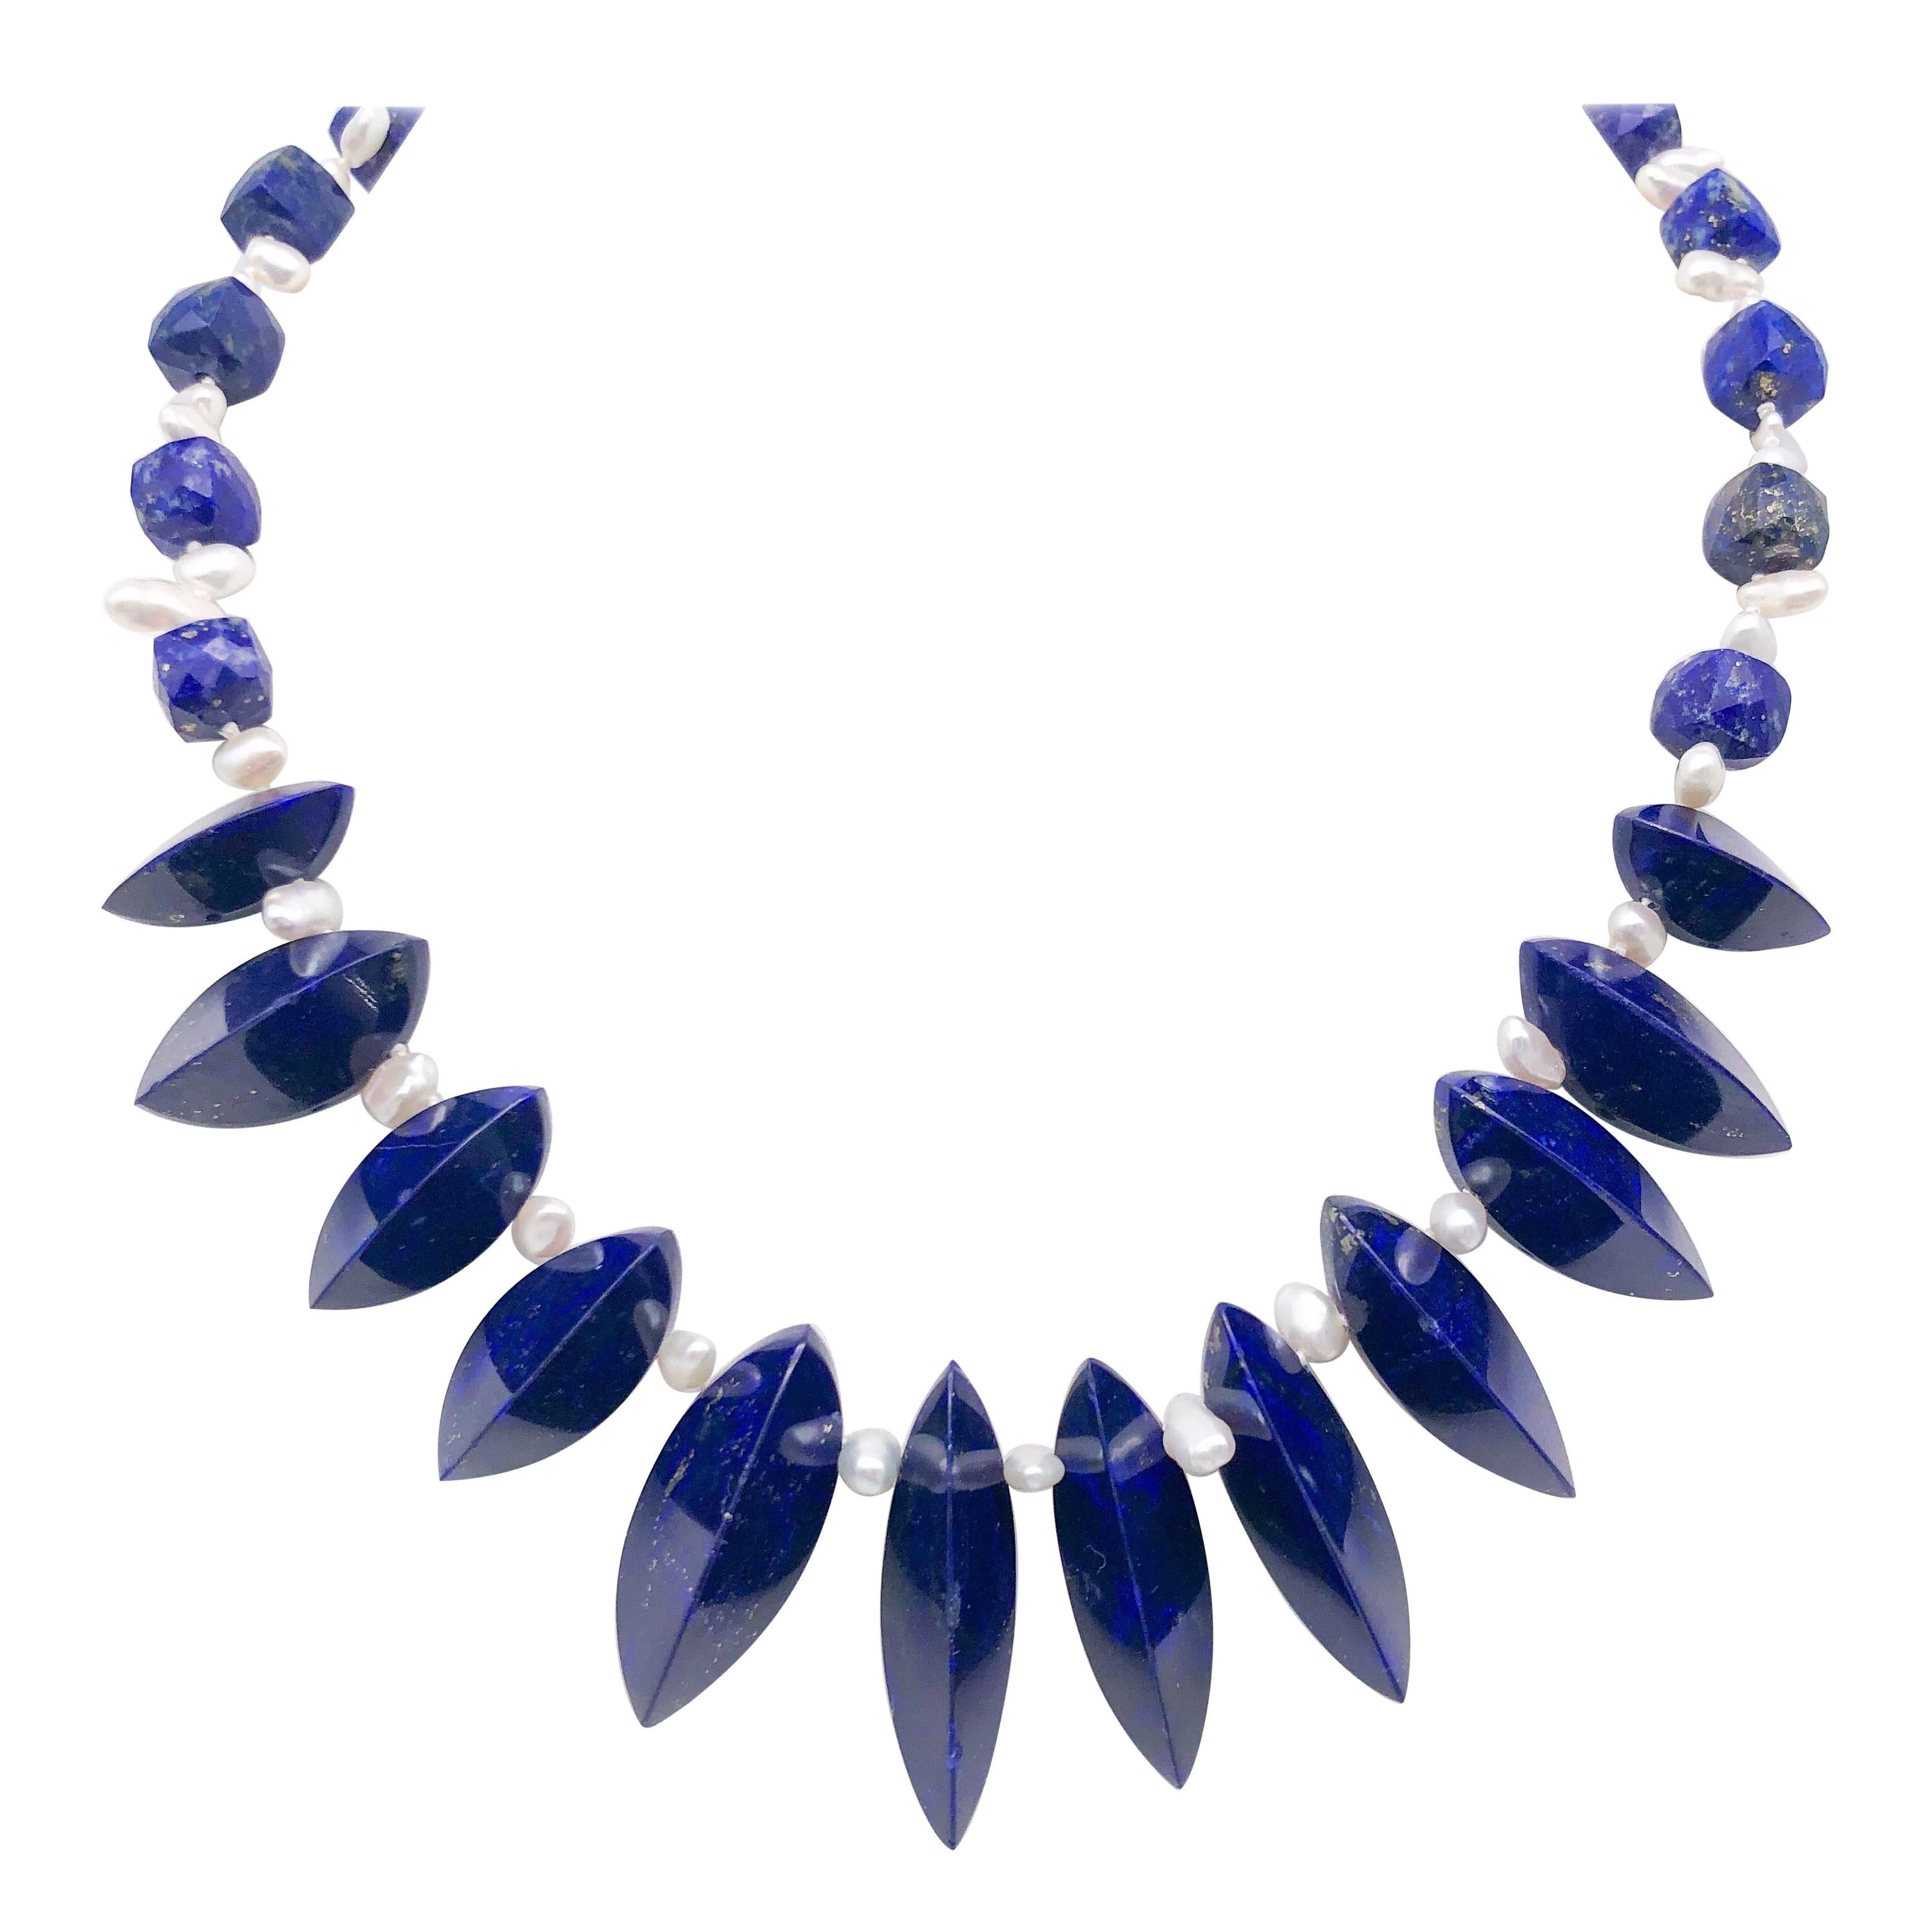 A.Jeschel Unusually cut Lapis beads are strung in a flattering necklace. For Sale